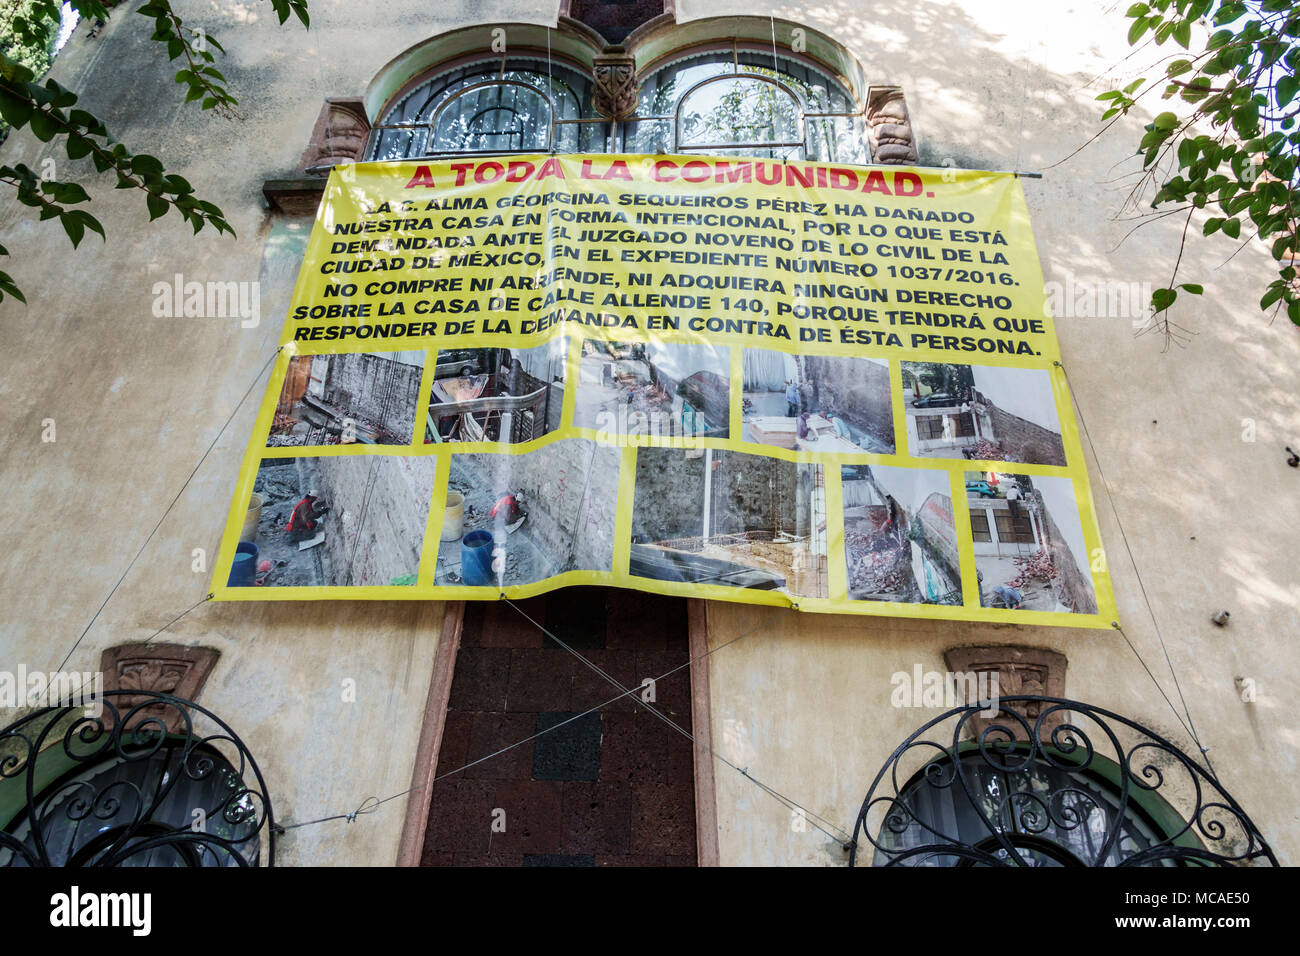 Mexico City,Mexican,Hispanic Latin Latino ethnic,Coyoacan,Del Carmen,sign,public notice,accusation,indictment,expose,warning,legal action not Stock Photo